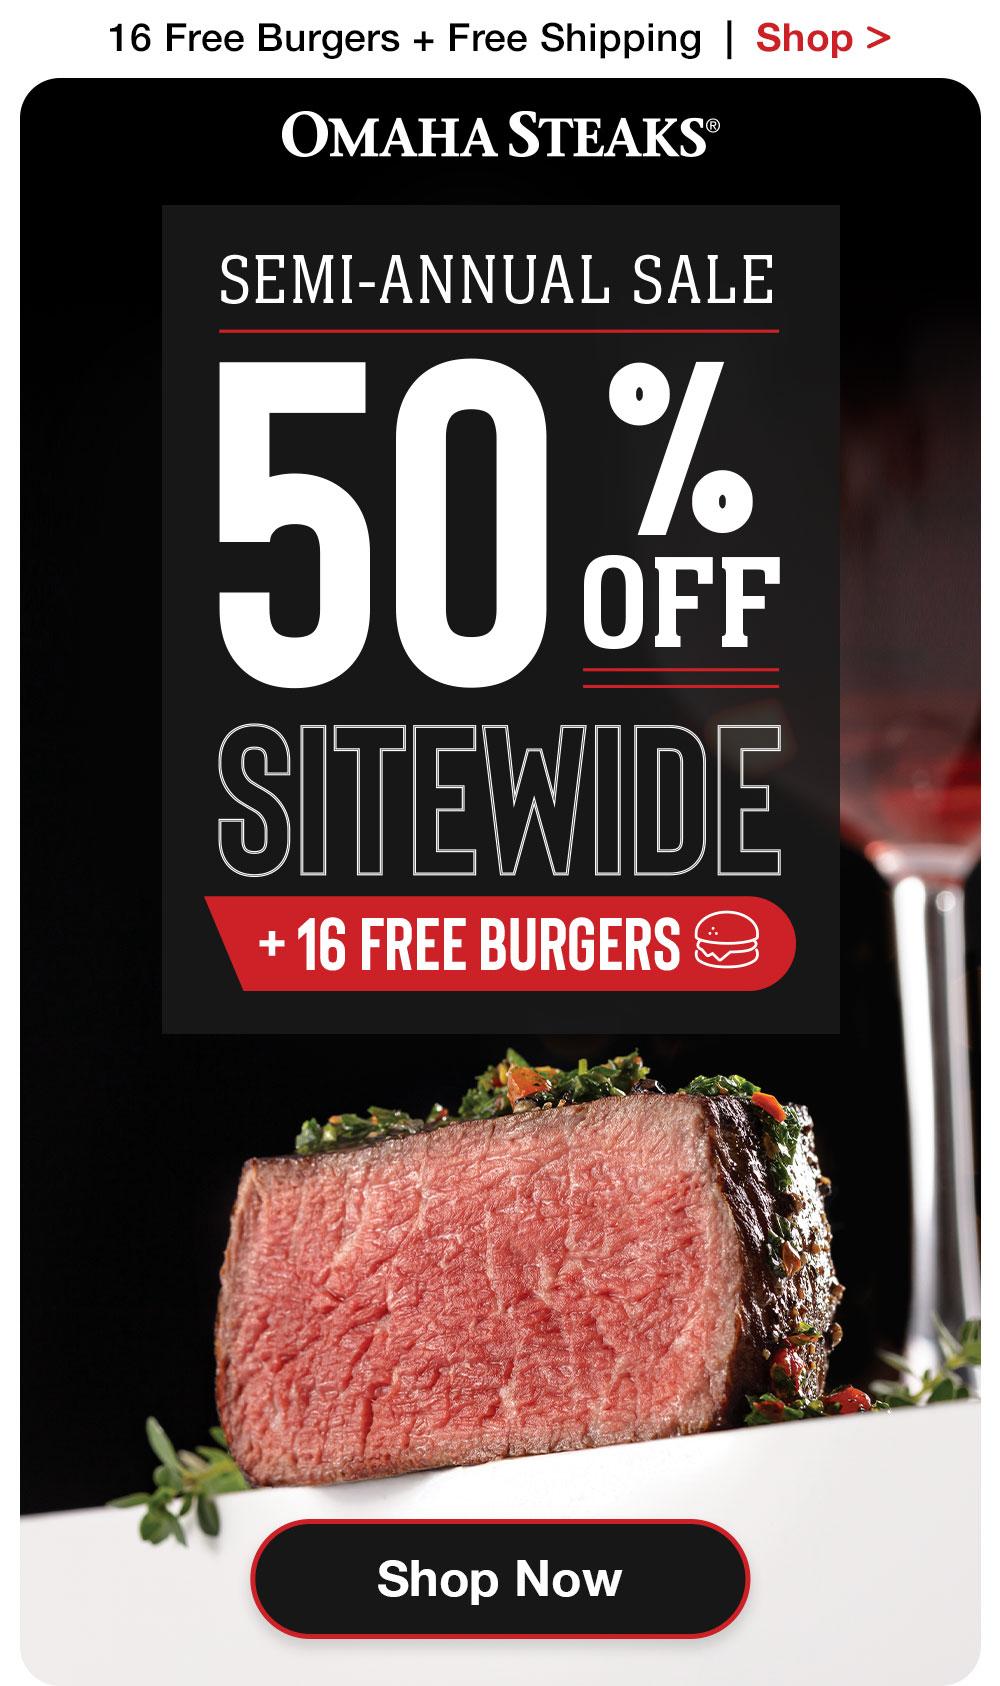 16 Free Burgers + Free Shipping  |  Shop >   OMAHA STEAKS� | SEMI-ANNUAL SALE - 50% OFF SITEWIDE + 16 FREE BURGERS || SHOP NOW